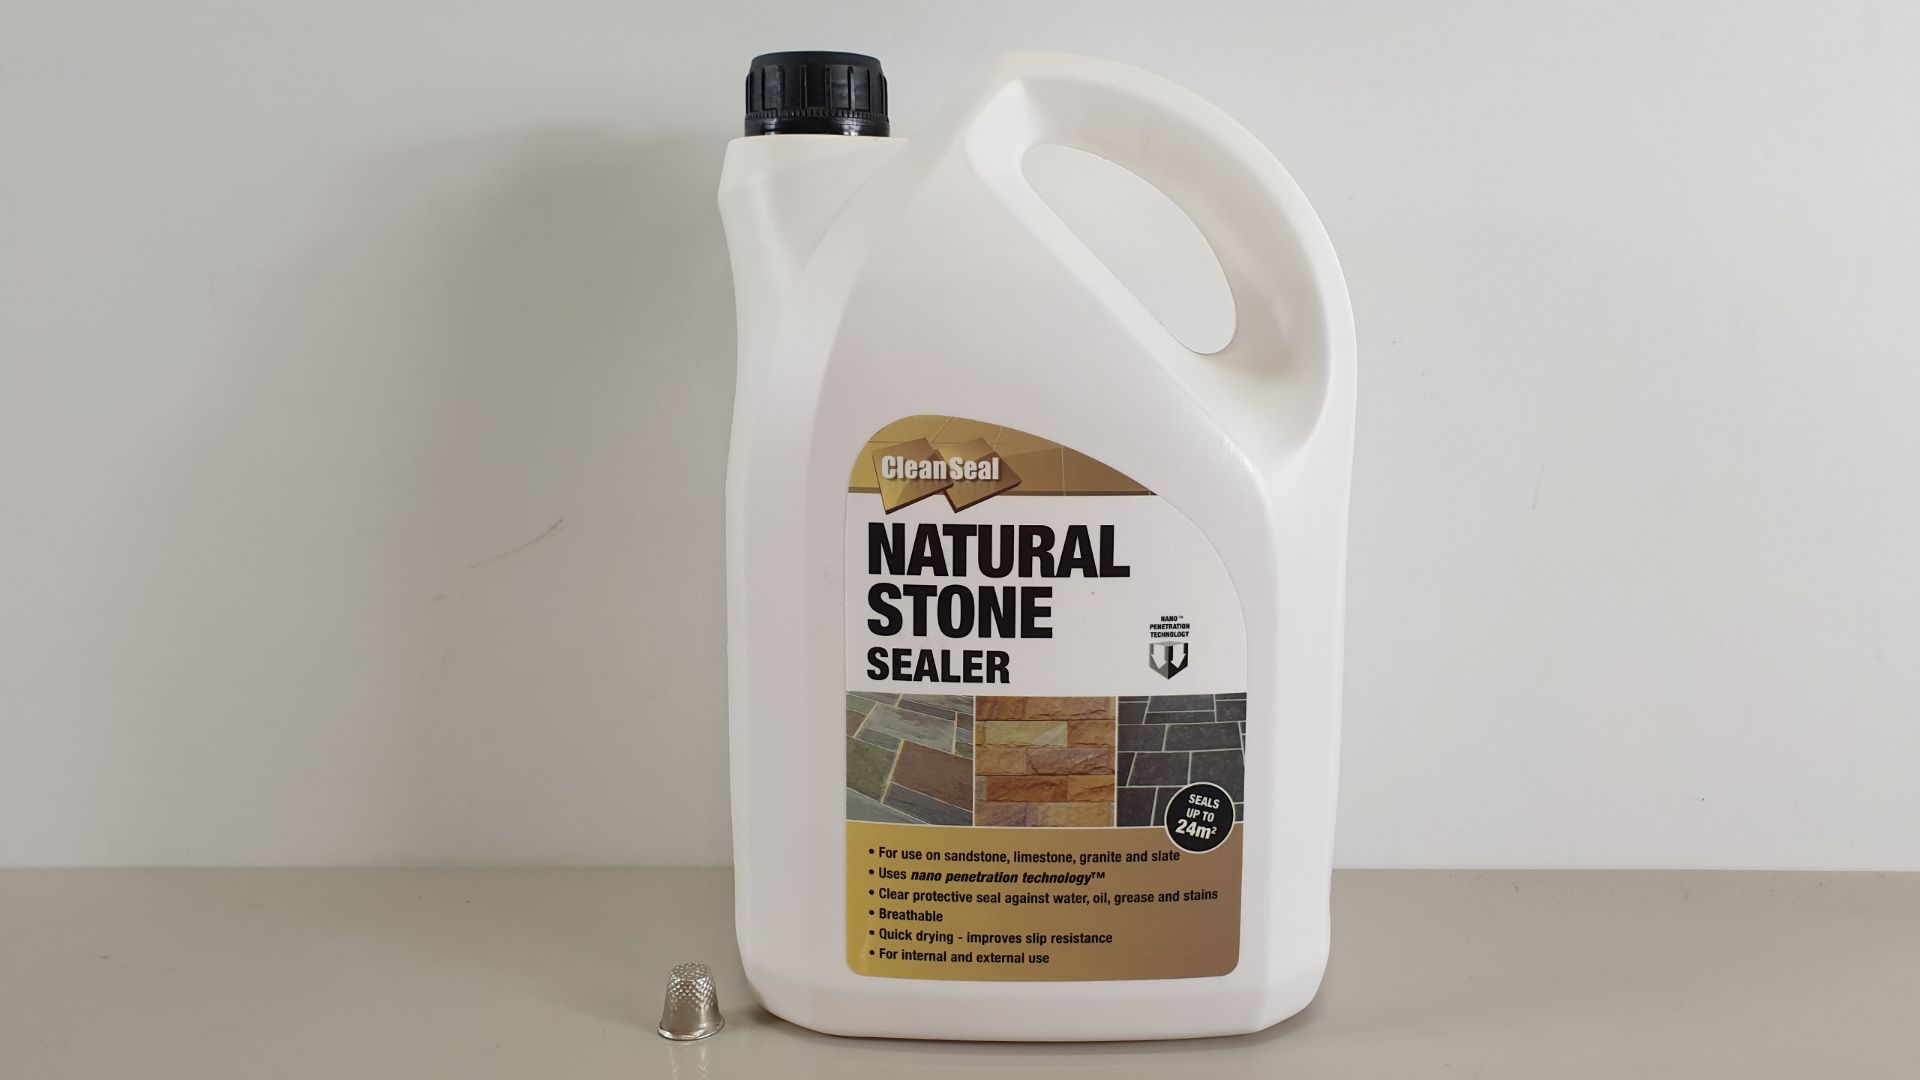 FULL PALLET CONTAINING 144 X 4L CLEANSEAL NATURAL STONE SEALER WITH NANO PENETRATION TECHNOLOGY